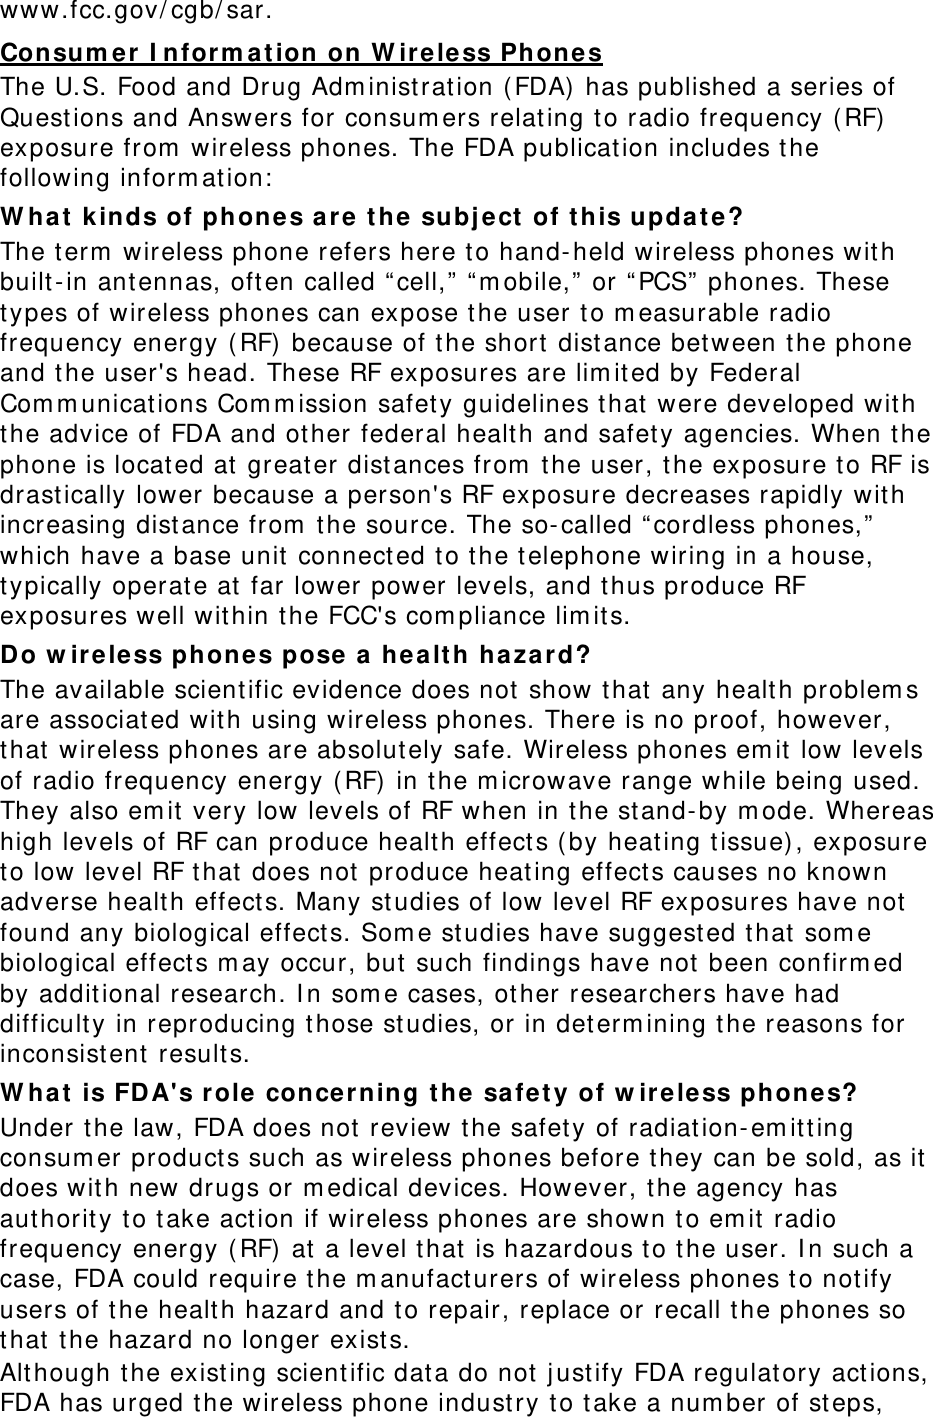 www.fcc.gov/ cgb/ sar. Consum er  I nfor m at ion on W ir ele ss Phon es The U.S. Food and Drug Adm inist ration (FDA) has published a series of Questions and Answers for consum ers relating to radio frequency ( RF)  exposure from  wireless phones. The FDA publication includes t he following inform at ion:  W ha t kinds of phone s are  the subj ect of t his upda t e? The t erm  wireless phone refers here to hand- held wireless phones with built-in antennas, often called “ cell,”  “ m obile,”  or “ PCS”  phones. These types of wireless phones can expose t he user t o m easurable radio frequency energy ( RF) because of the short  distance bet ween the phone and the user&apos;s head. These RF exposures are lim ited by Federal Com m unications Com m ission safet y guidelines that  were developed with the advice of FDA and ot her federal healt h and safety agencies. When t he phone is located at great er dist ances from  t he user, t he exposure t o RF is drast ically lower because a person&apos;s RF exposure decreases rapidly with increasing distance from  t he source. The so- called “ cordless phones,”  which have a base unit connect ed to t he t elephone wiring in a house, typically operate at far lower power levels, and t hus produce RF exposures well within t he FCC&apos;s com pliance lim it s. Do w irele ss phone s pose a h ea lt h hazar d? The available scient ific evidence does not  show that any health problem s are associated wit h using wireless phones. There is no proof, however, that wireless phones are absolut ely safe. Wireless phones em it low levels of radio frequency energy ( RF) in t he m icrowave range while being used. They also em it very low levels of RF when in t he stand- by m ode. Whereas high levels of RF can produce health effect s ( by heat ing t issue) , exposure to low level RF that  does not  produce heating effect s causes no known adverse health effect s. Many st udies of low level RF exposures have not  found any biological effect s. Som e studies have suggest ed t hat som e biological effect s m ay occur, but  such findings have not been confirm ed by additional research. I n som e cases, ot her researchers have had difficulty in reproducing t hose studies, or in det erm ining t he reasons for inconsist ent results. W ha t is FD A&apos;s role  concer ning t he  safe t y of w ir ele ss ph ones? Under the law, FDA does not review the safet y of radiat ion- em itt ing consum er product s such as wireless phones before they can be sold, as it  does wit h new drugs or m edical devices. However, t he agency has aut hority to take act ion if wireless phones are shown t o em it radio frequency energy ( RF)  at a level that  is hazardous t o t he user. I n such a case, FDA could require t he m anufact urers of w ireless phones t o not ify users of t he health hazard and t o repair, replace or recall t he phones so that the hazard no longer exist s. Alt hough t he existing scient ific dat a do not j ust ify FDA regulat ory actions, FDA has urged the wireless phone industry to t ake a num ber of st eps, 